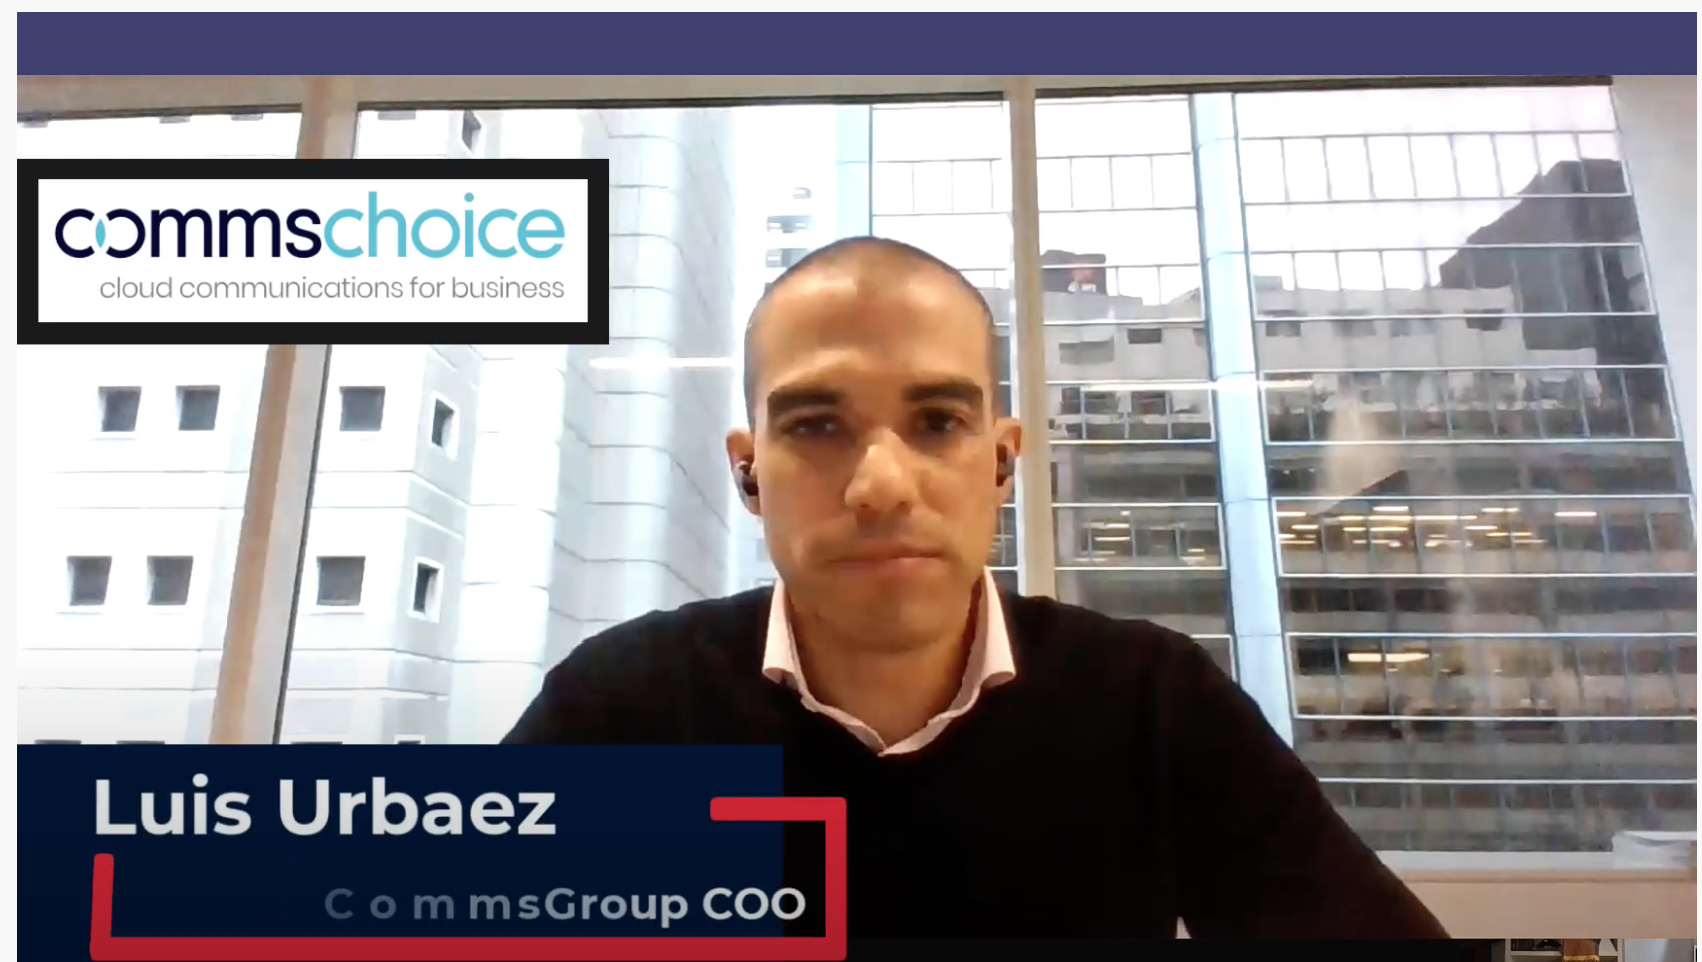 iTWire interview with Luis Urbaez